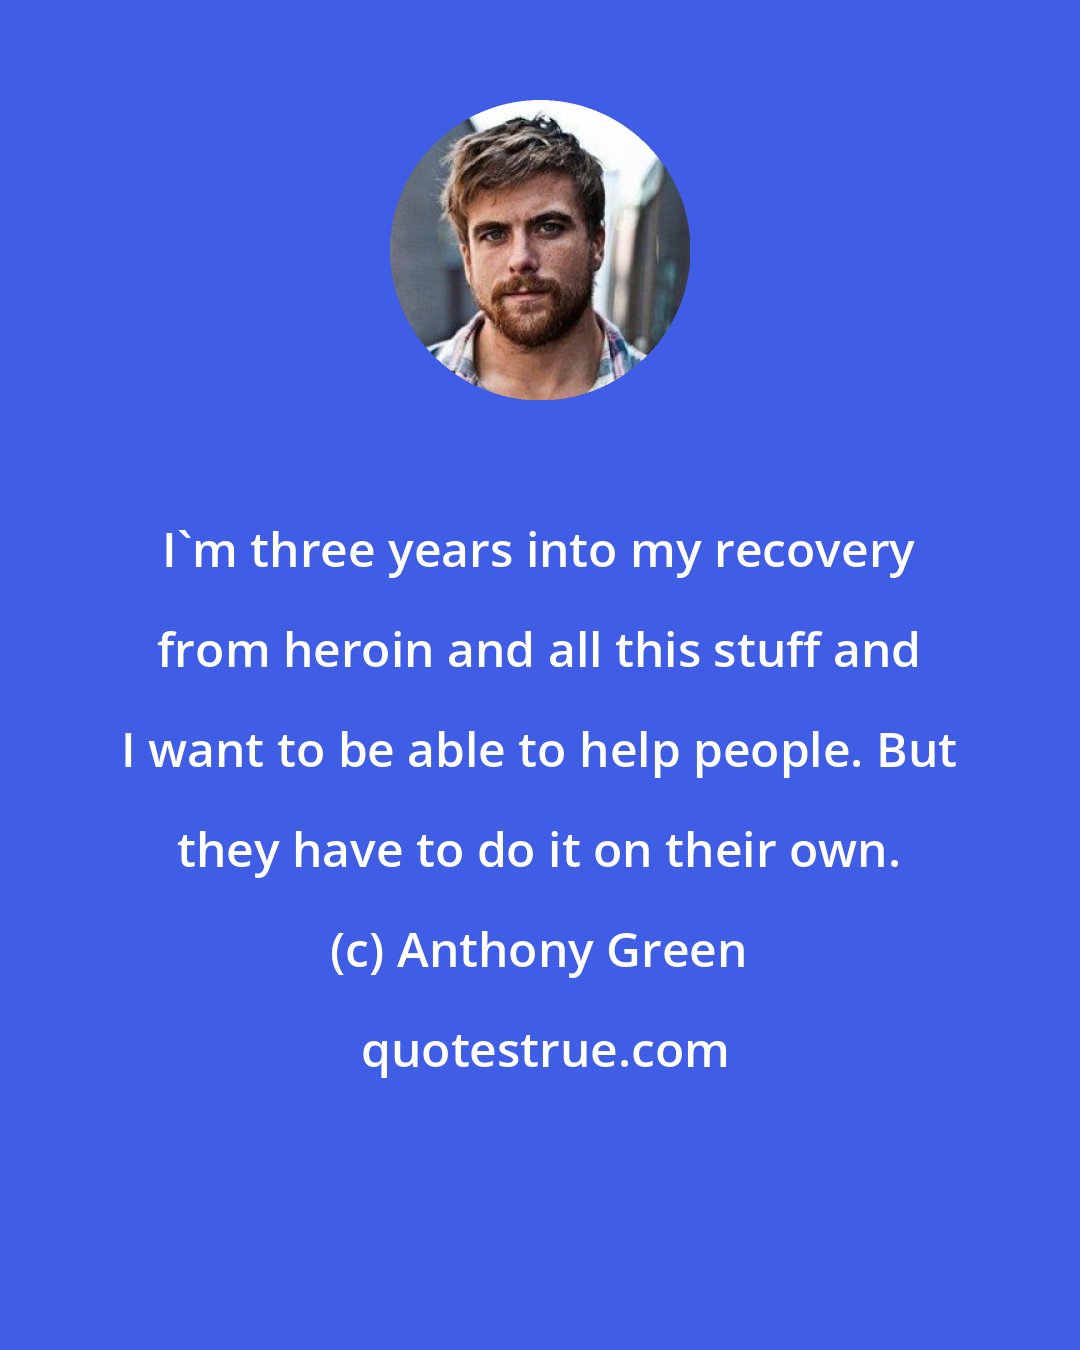 Anthony Green: I'm three years into my recovery from heroin and all this stuff and I want to be able to help people. But they have to do it on their own.